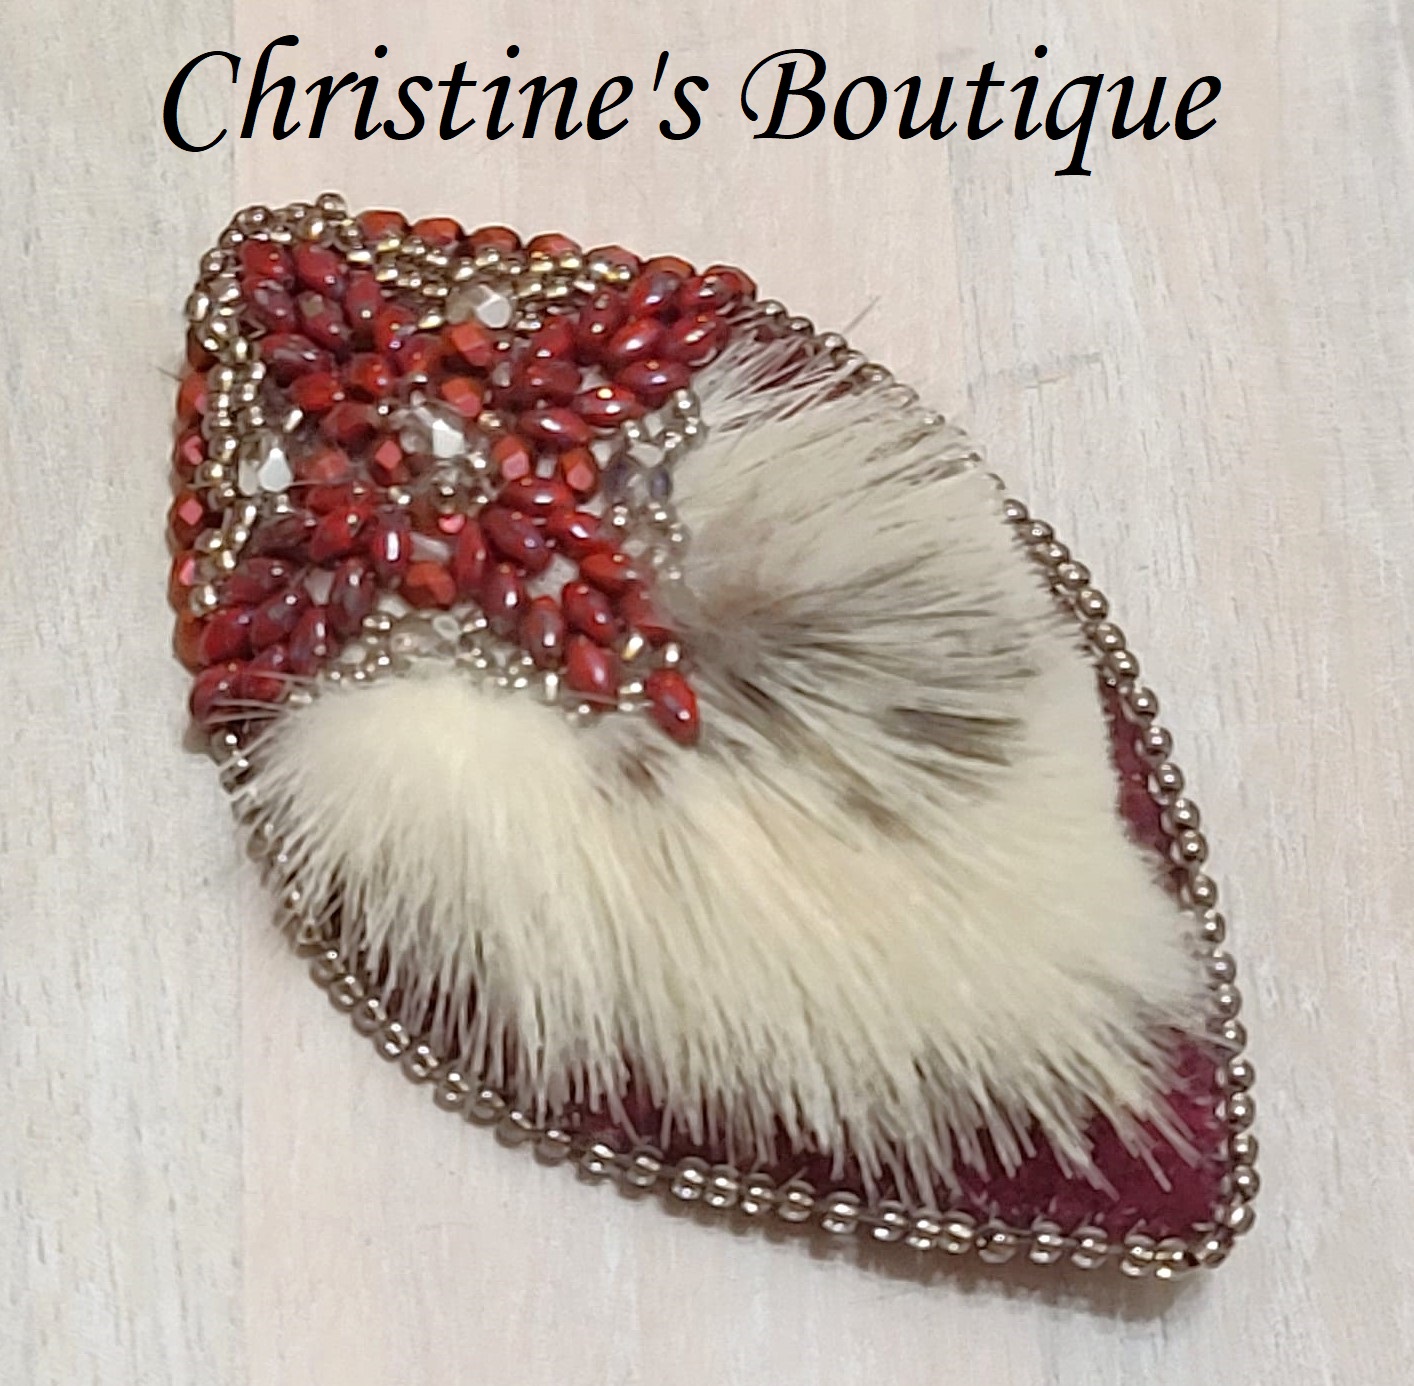 Bead and crystal pin, mink fur accents, handcrafted,